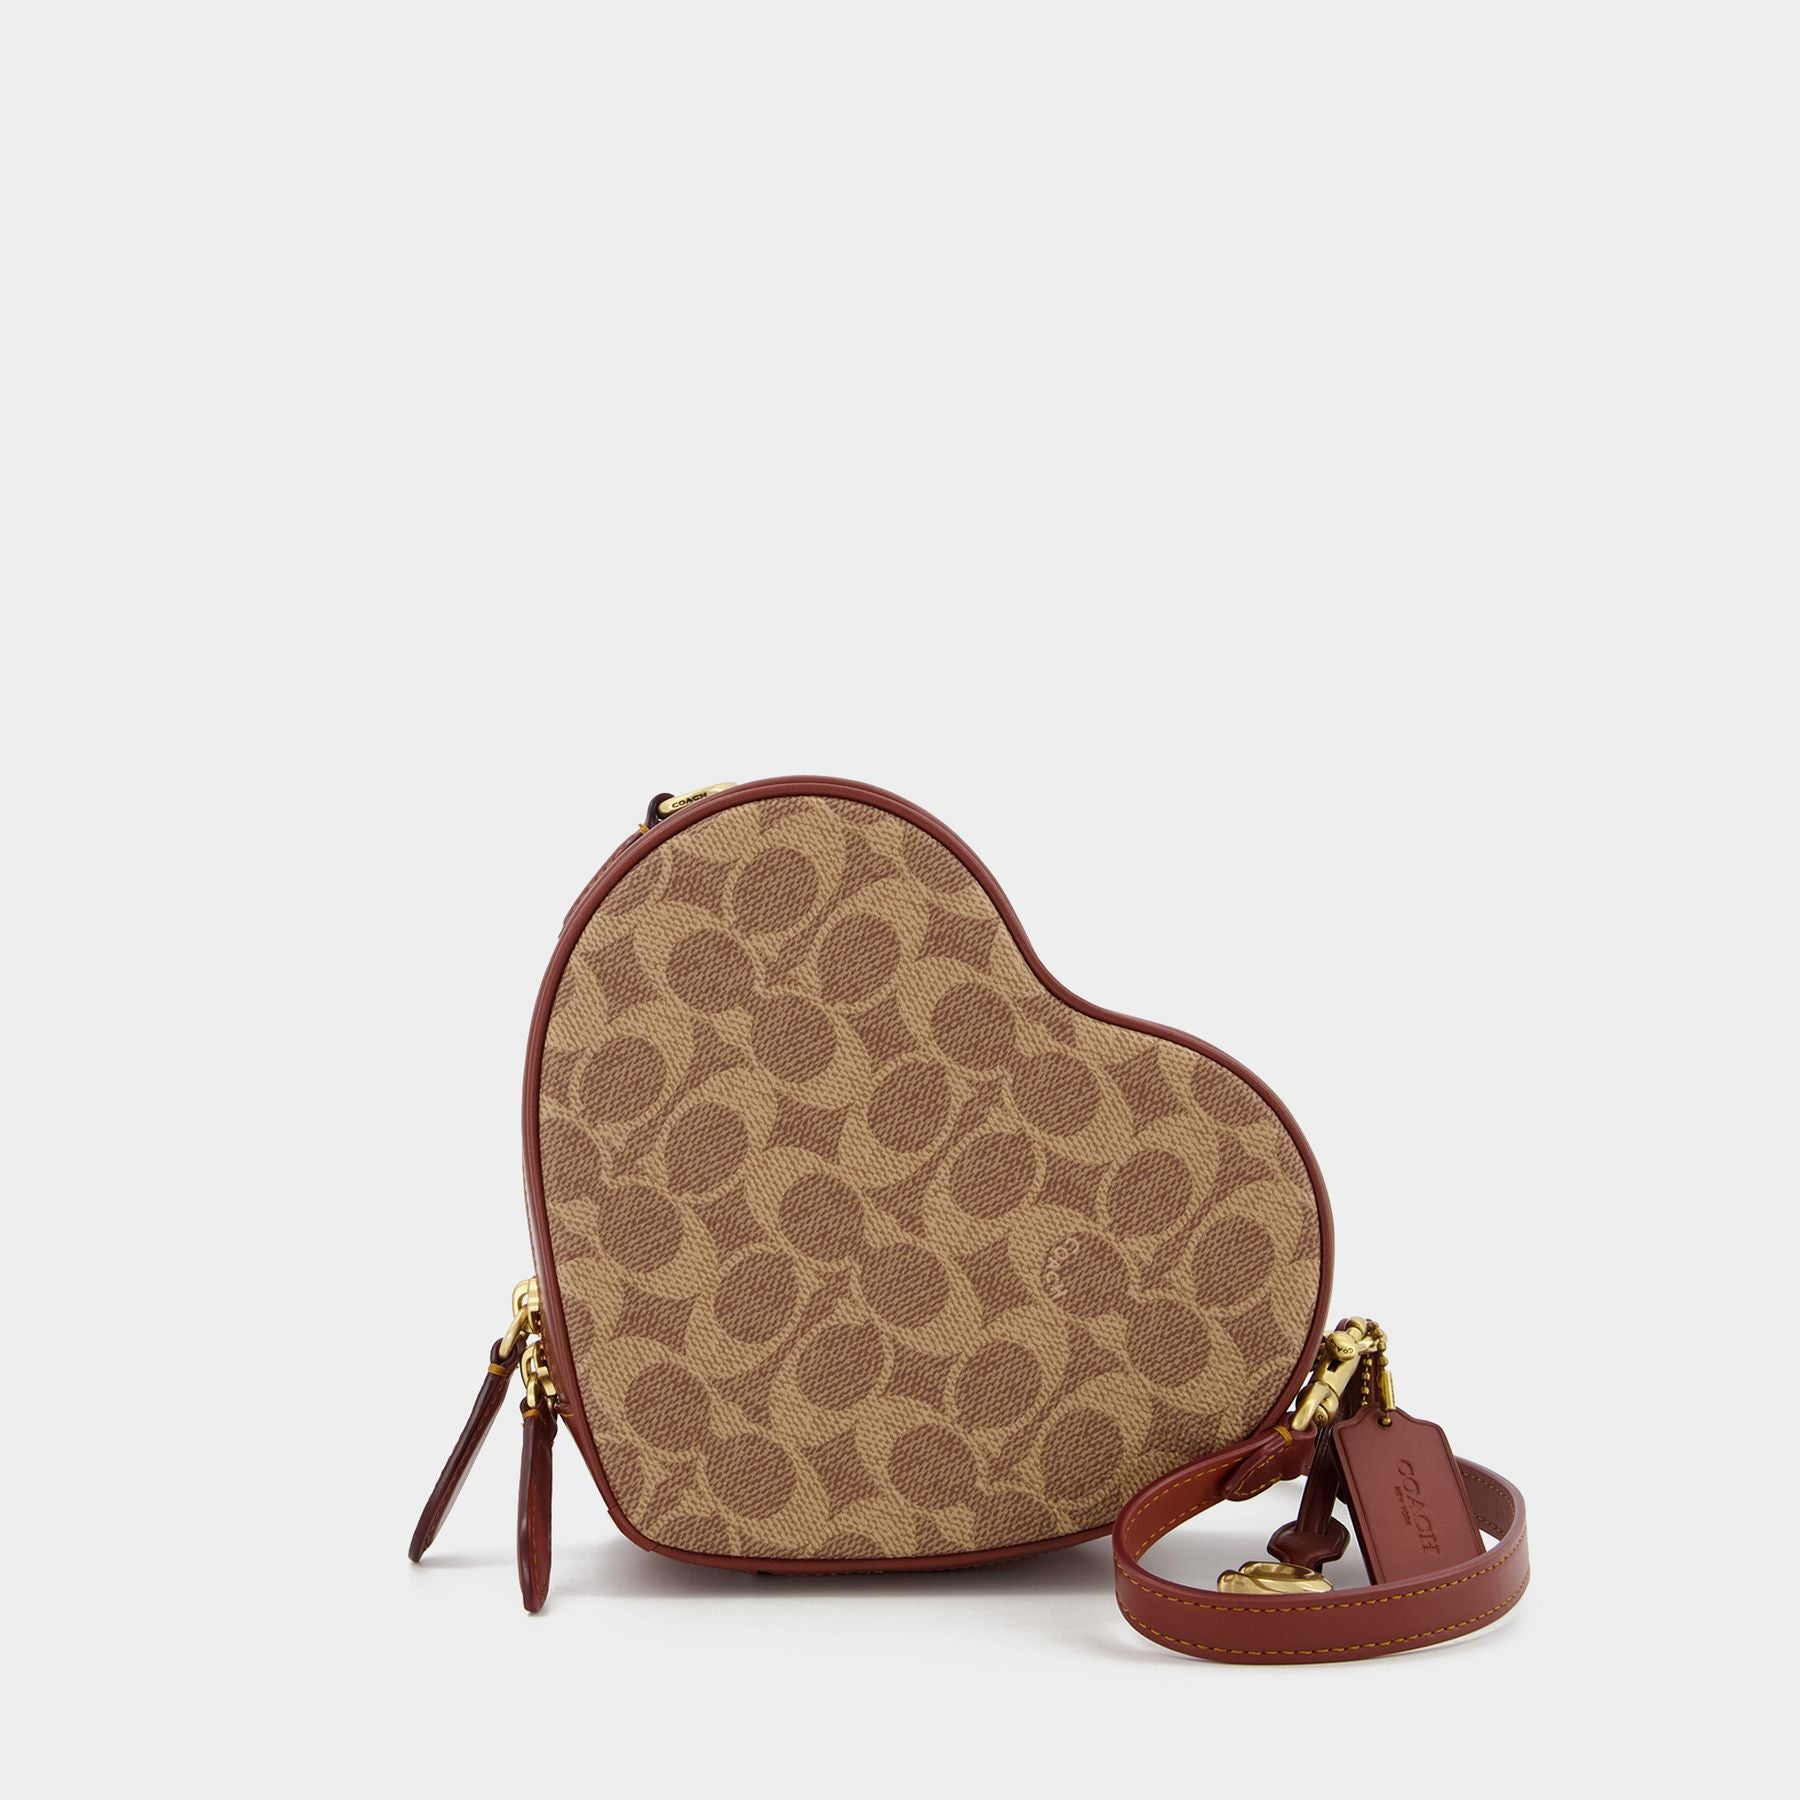 Coach Heart Coin Purse-Sold Out!